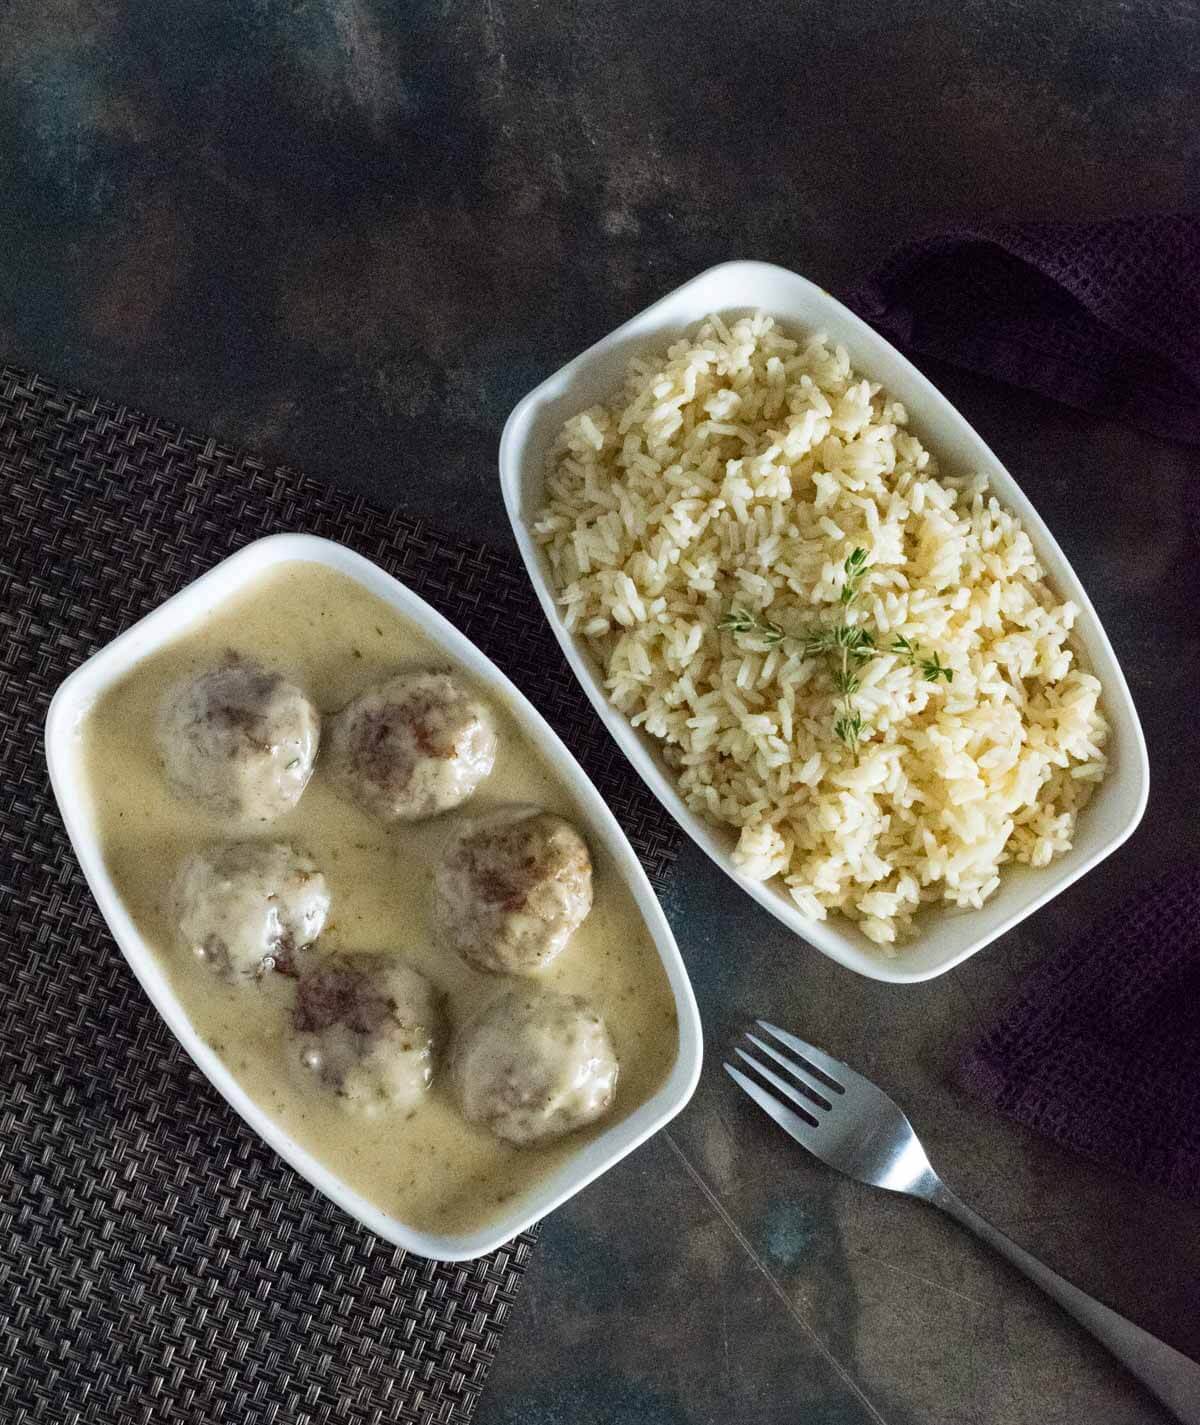 Meatballs with rice.